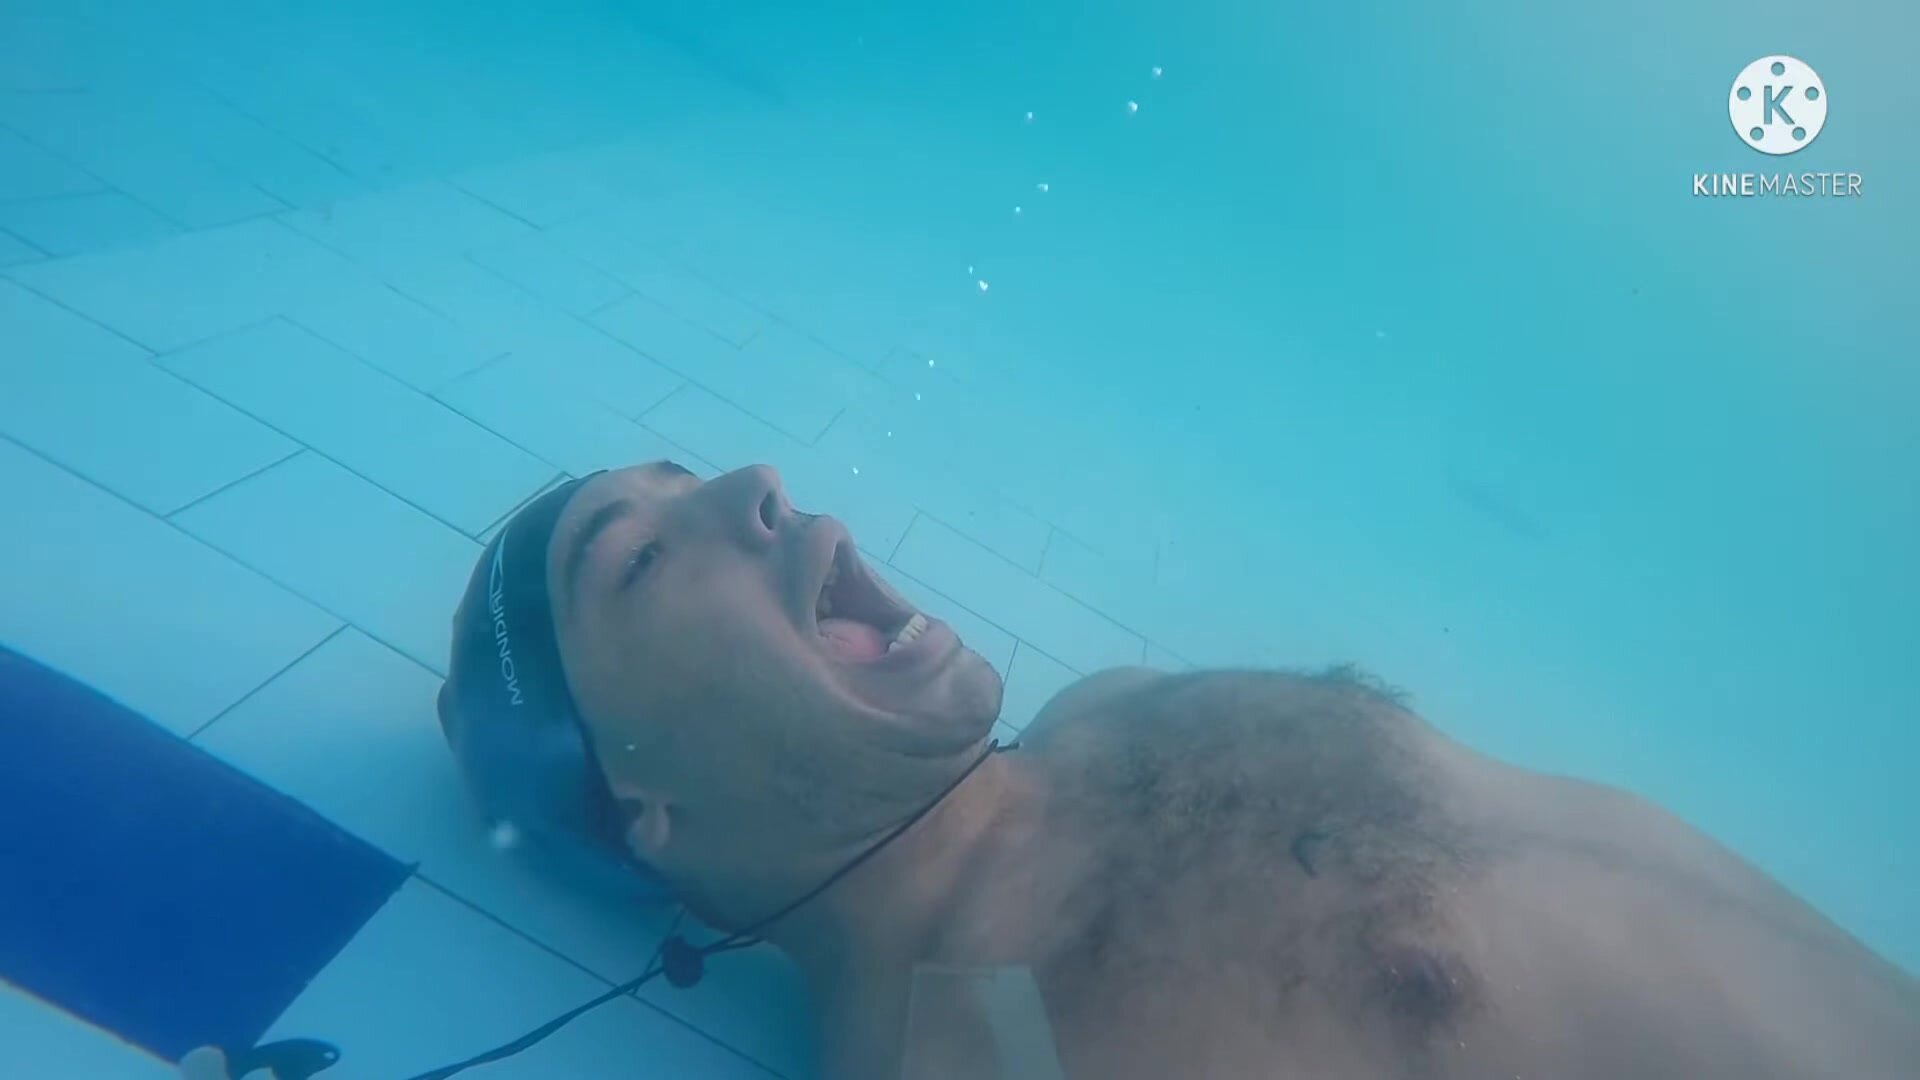 Kareem breatholds barefaced and mouth open underwater